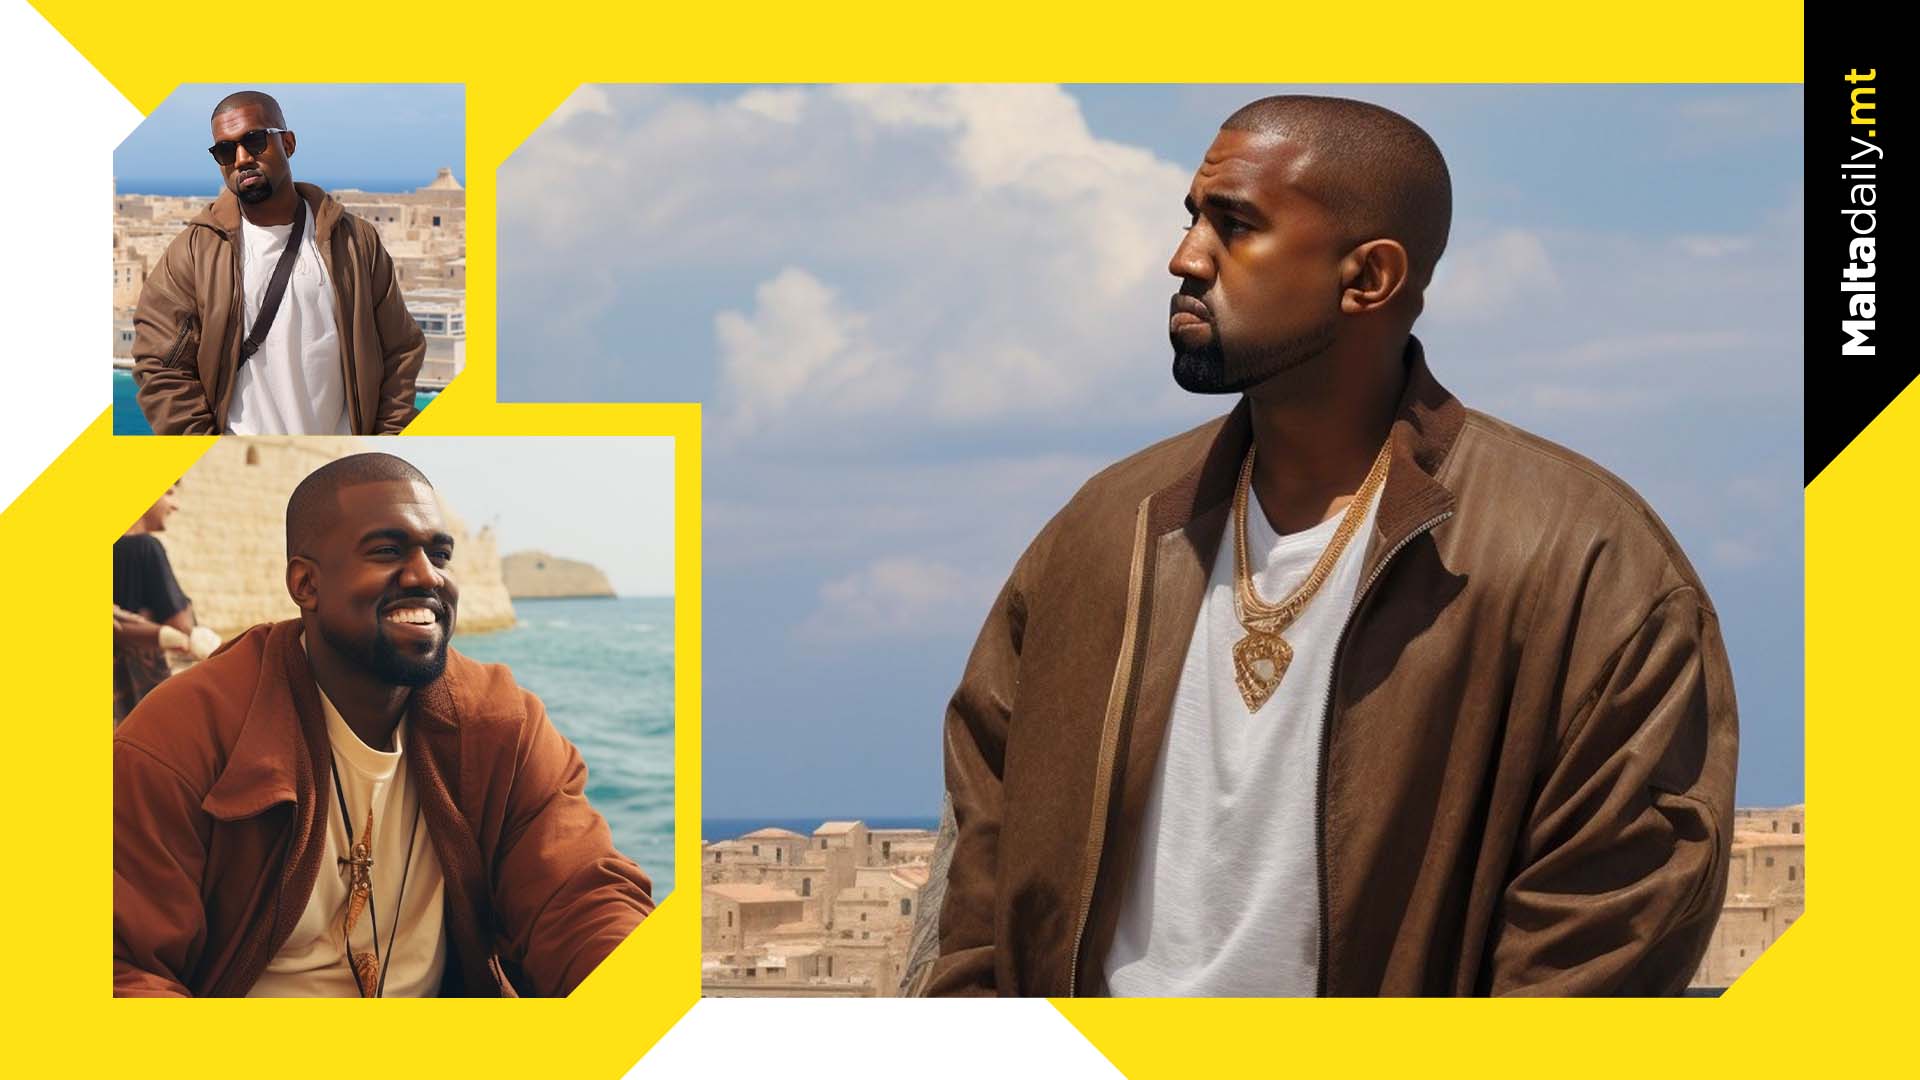 What If Kanye West Visited Malta?